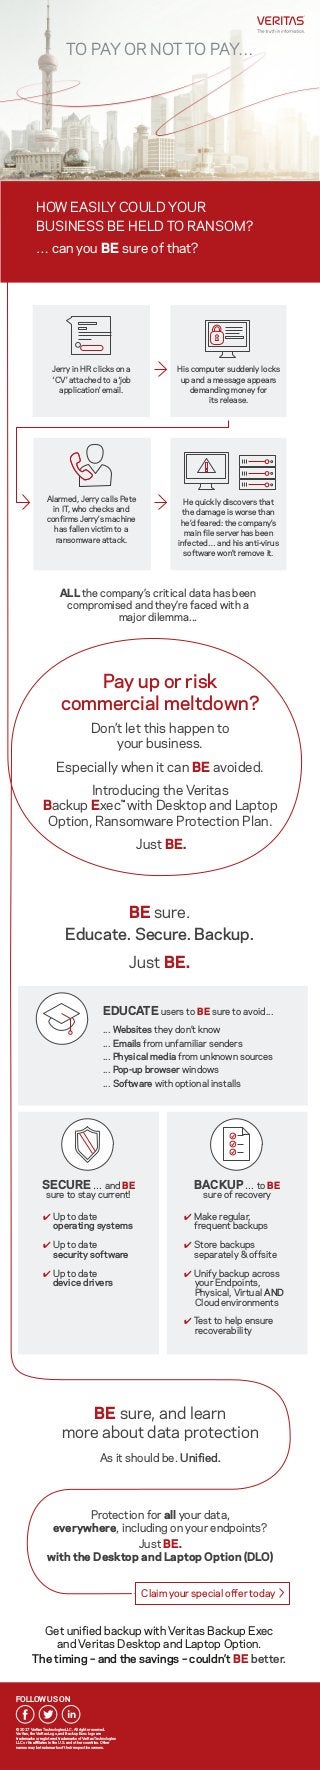 FOLLOW US ON
© 2017 Veritas Technologies LLC. All rights reserved.
Veritas, the Veritas Logo, and Backup Exec logo are
trademarks or registered trademarks of Veritas Technologies
LLC or its affiliates in the U.S. and other countries. Other
names may be trademarks of their respective owners.
Get unified backup with Veritas Backup Exec
and Veritas Desktop and Laptop Option.
The timing – and the savings – couldn’t BE better.
HOW EASILY COULD YOUR
BUSINESS BE HELD TO RANSOM?
… can you BE sure of that?
Pay up or risk
commercial meltdown?
Don’t let this happen to
your business.
Especially when it can BE avoided.
Introducing the Veritas
Backup Exec™
with Desktop and Laptop
Option, Ransomware Protection Plan.
Just BE.
Claim your special offer today
EDUCATE users to BE sure to avoid...
... Websites they don’t know
... Emails from unfamiliar senders
... Physical media from unknown sources
... Pop-up browser windows
... Software with optional installs
BE sure.
Educate. Secure. Backup.
Just BE.
BE sure, and learn
more about data protection
As it should be. Unified.
Protection for all your data,
everywhere, including on your endpoints?
Just BE.
with the Desktop and Laptop Option (DLO)
SECURE … and BE
sure to stay current!
BACKUP … to BE
sure of recovery
✔ Up to date
operating systems
✔ Up to date
security software
✔ Up to date
device drivers
✔ Make regular,
frequent backups
✔ Store backups
separately & offsite
✔ Unify backup across
your Endpoints,
Physical, Virtual AND
Cloud environments
✔ Test to help ensure
recoverability
Alarmed, Jerry calls Pete
in IT, who checks and
confirms Jerry’s machine
has fallen victim to a
ransomware attack.
He quickly discovers that
the damage is worse than
he’d feared: the company’s
main file server has been
infected… and his anti-virus
software won’t remove it.
Jerry in HR clicks on a
‘CV’ attached to a ‘job
application’ email.
His computer suddenly locks
up and a message appears
demanding money for
its release.
ALL the company’s critical data has been
compromised and they’re faced with a
major dilemma...
TO PAY OR NOT TO PAY…
 